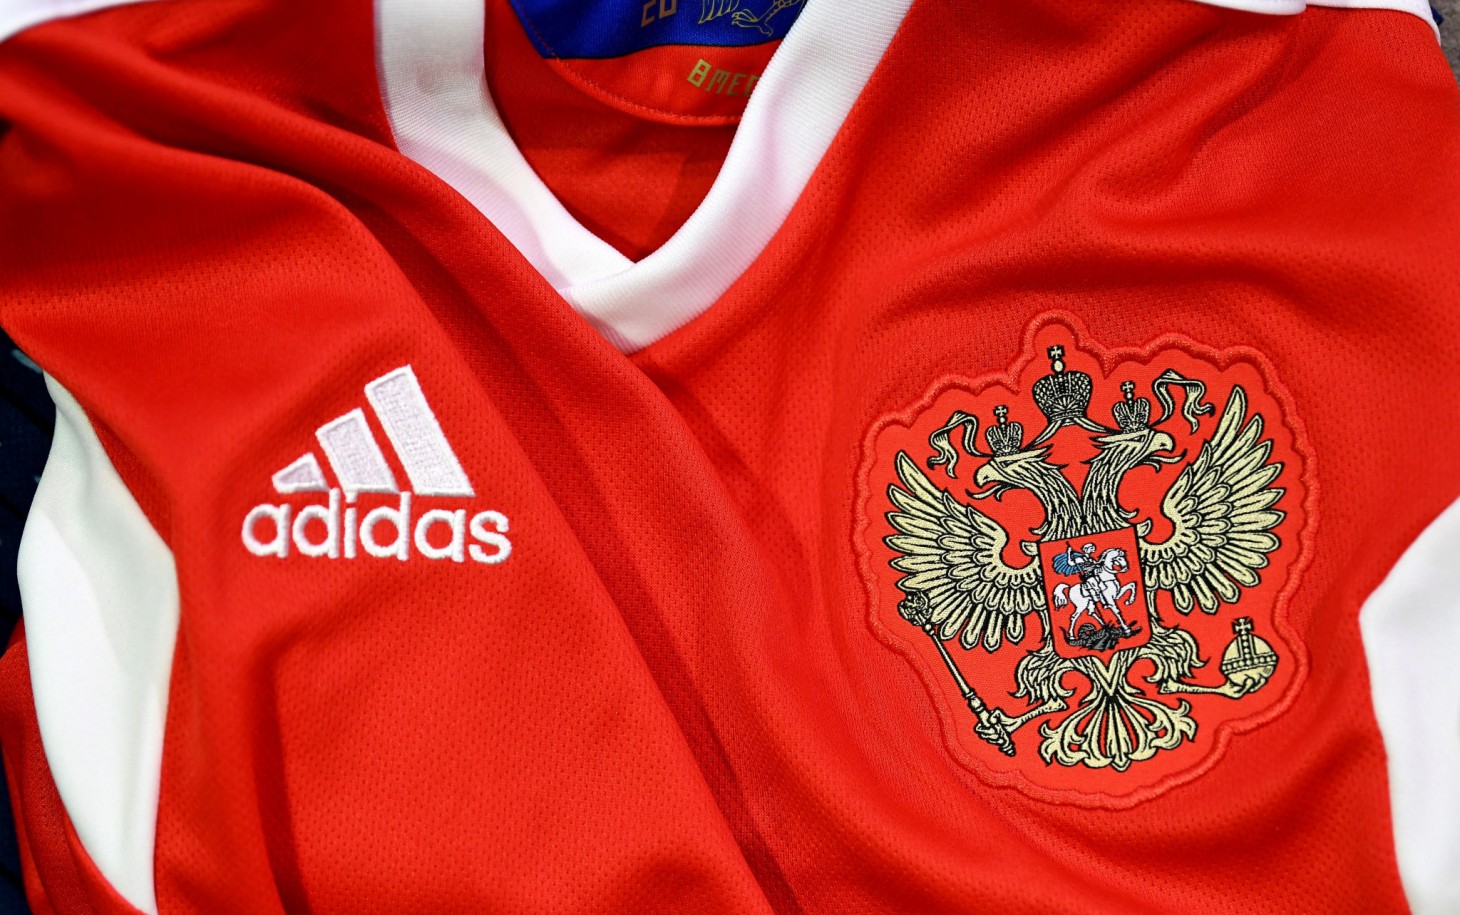 Russian Football Union aims to replace Adidas kits early in 2023